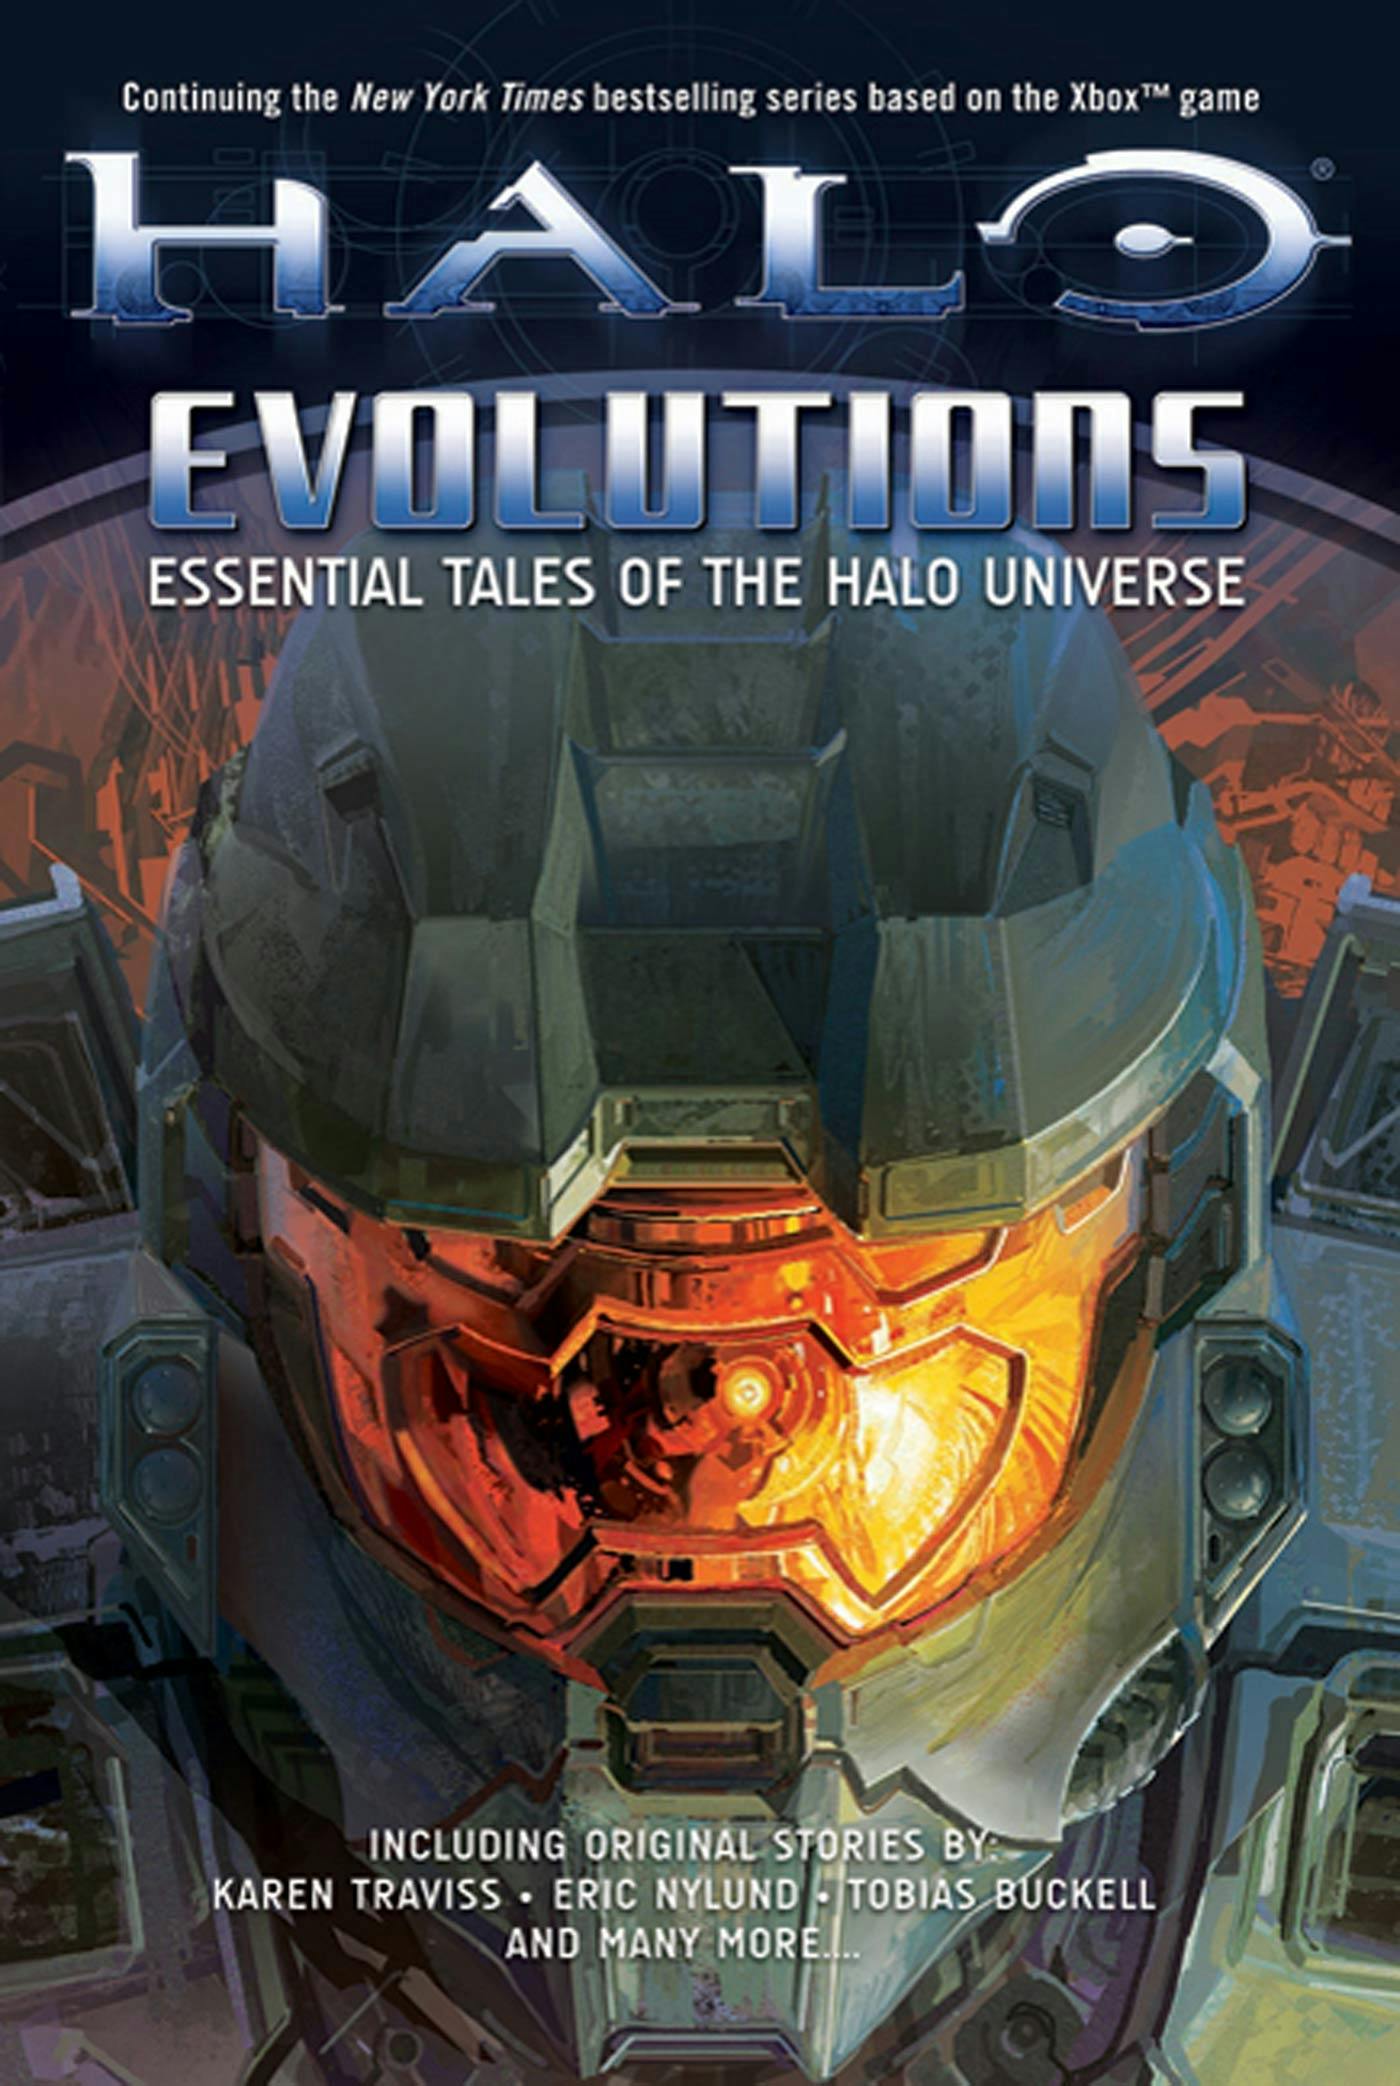 Cover for the book titled as: Halo: Evolutions